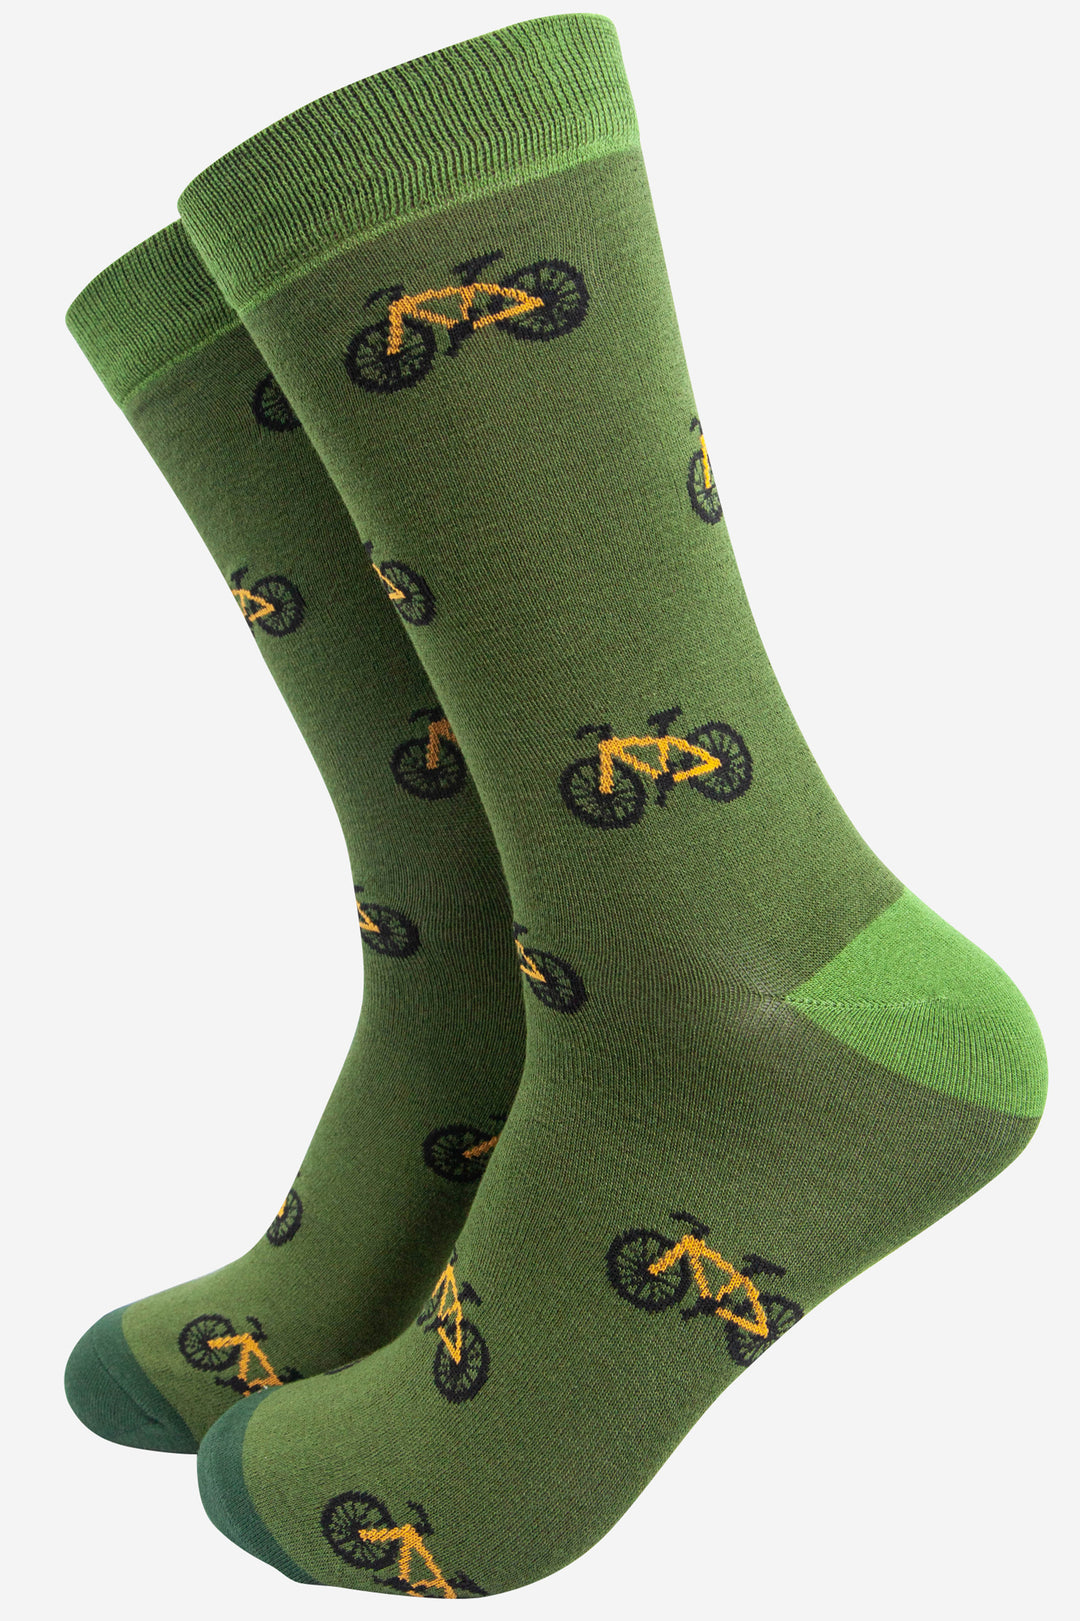 mens green bamboo dress socks with an all over yellow bicycle print pattern